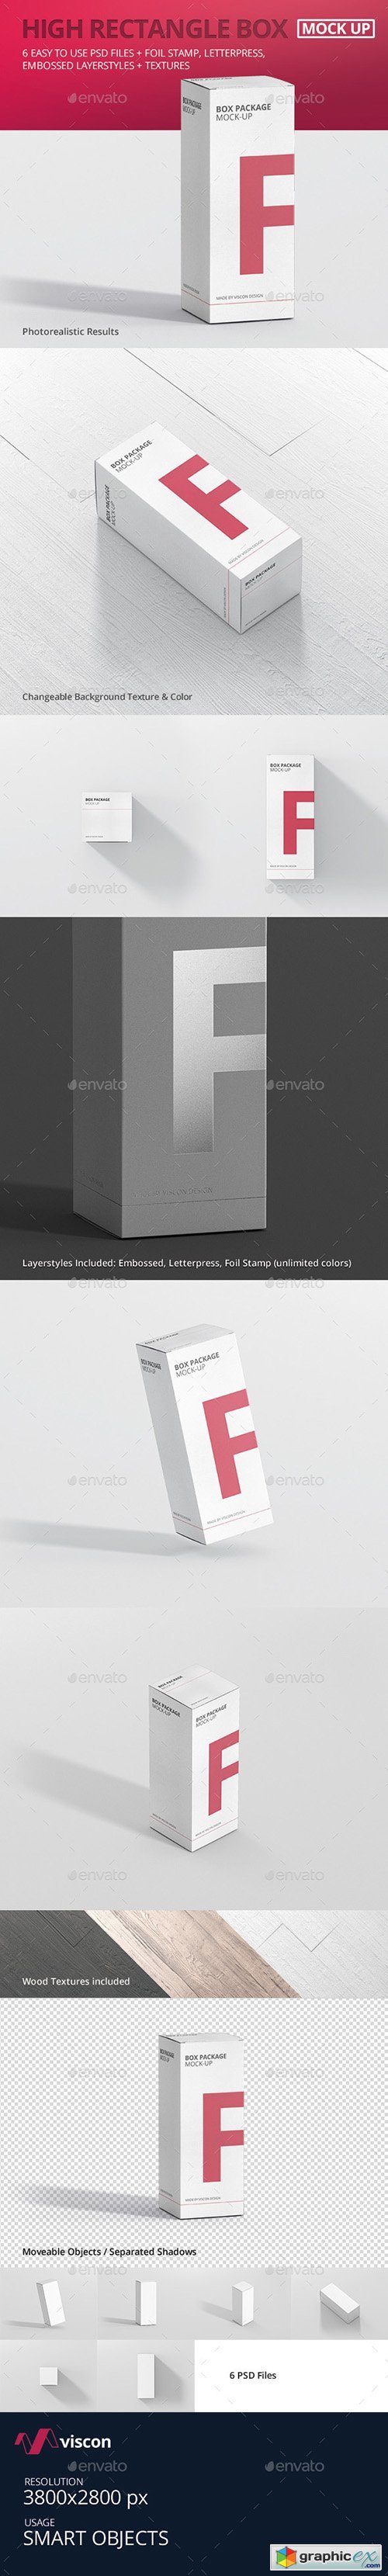 Package Box Mock-Up - High Rectangle